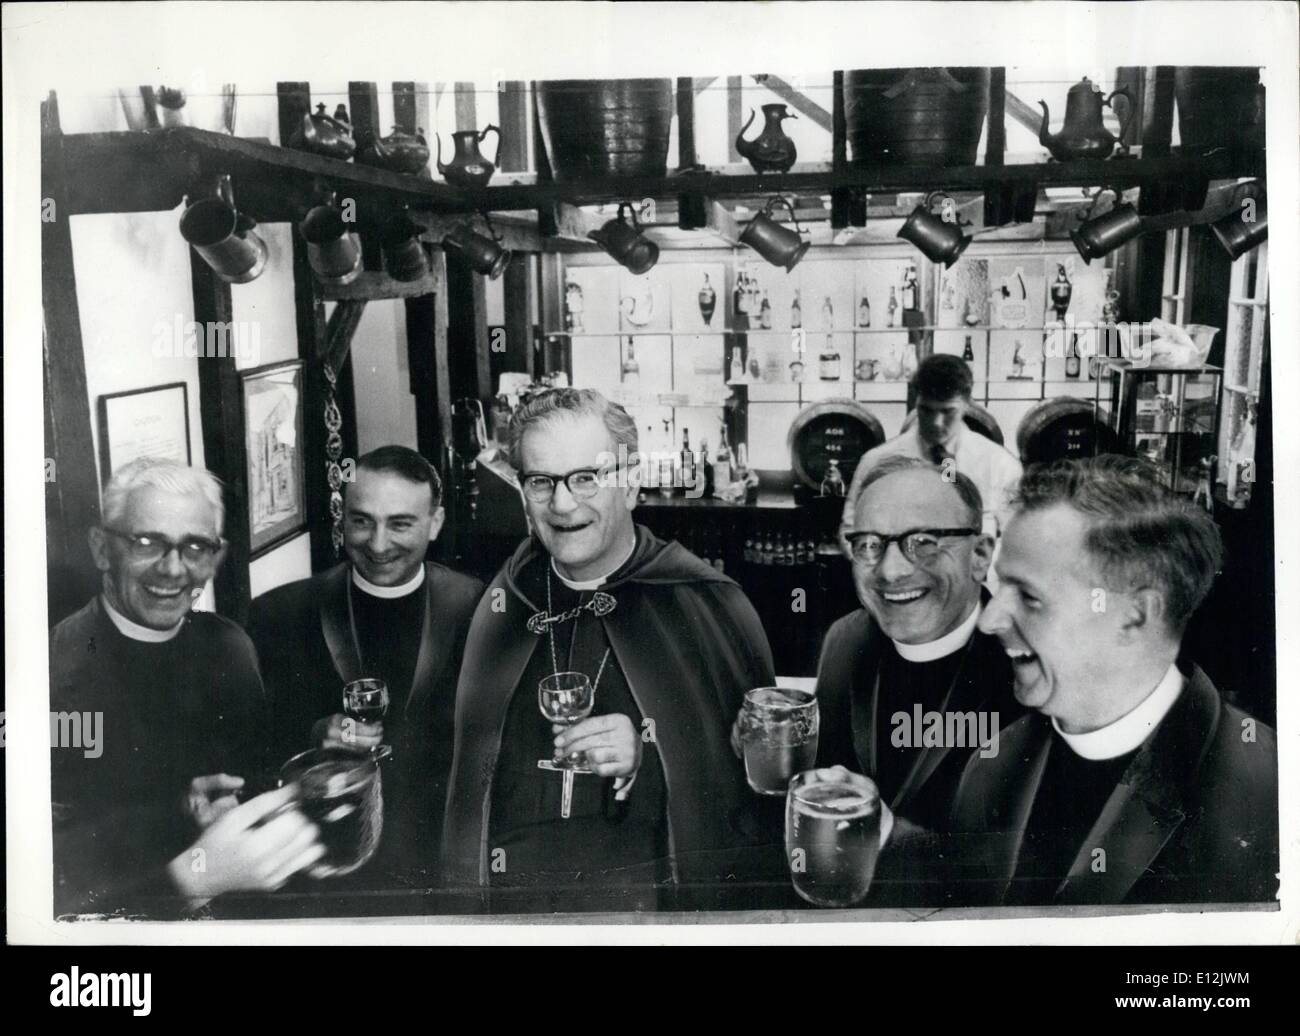 Feb. 24, 2012 - The new ''Men of the World'' Clergymen - The four clergymen enjoying a drink here with the Bishop of Southwark (Dr. Mervyn Stockwood) have Just been ordained. They are all men who have studied for the priesthood at night school while still carrying on their normal jobs during the day. Yesterday fourteen of them were ordained in Southwark Cathedral, and of course, like the men of the World that they are, they celebrated with a drink at the ''pub round the corner'' near the Cathedral.Photo Shows: The jolly clergymen with the Bishop, (Left to Right) Mr Stock Photo